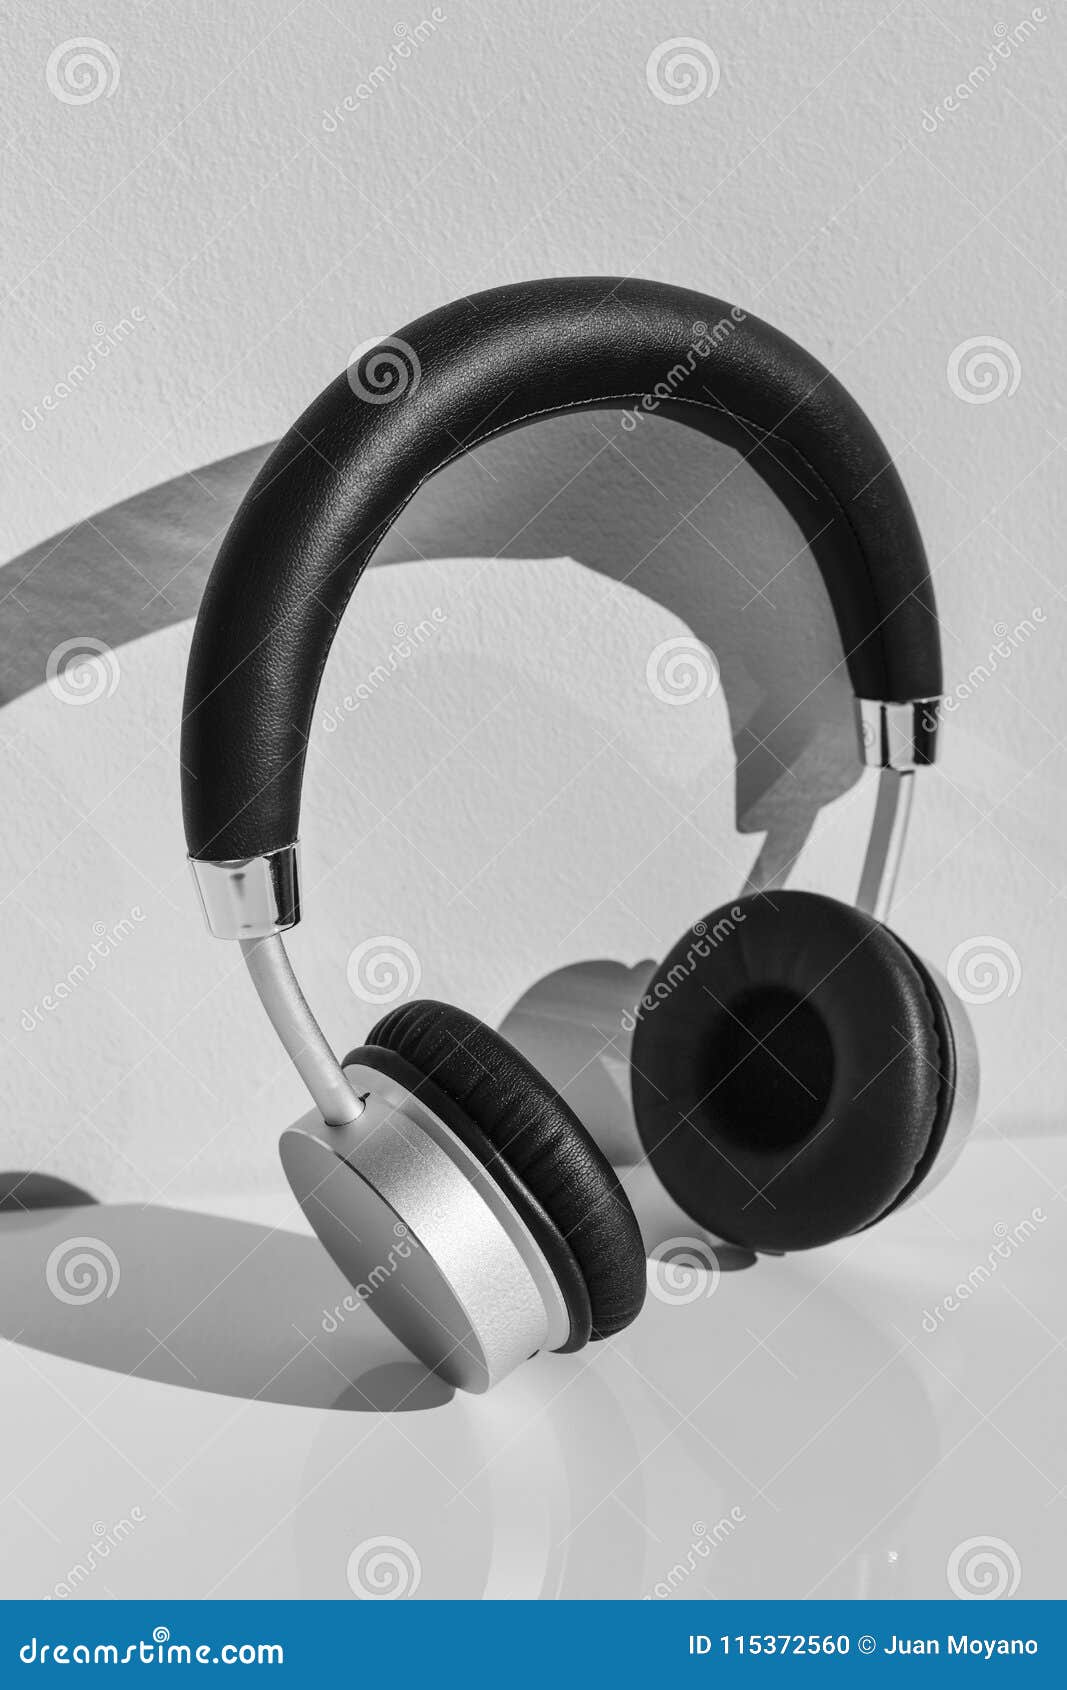 Wireless Headphones on a White Background Stock Photo - Image of head ...